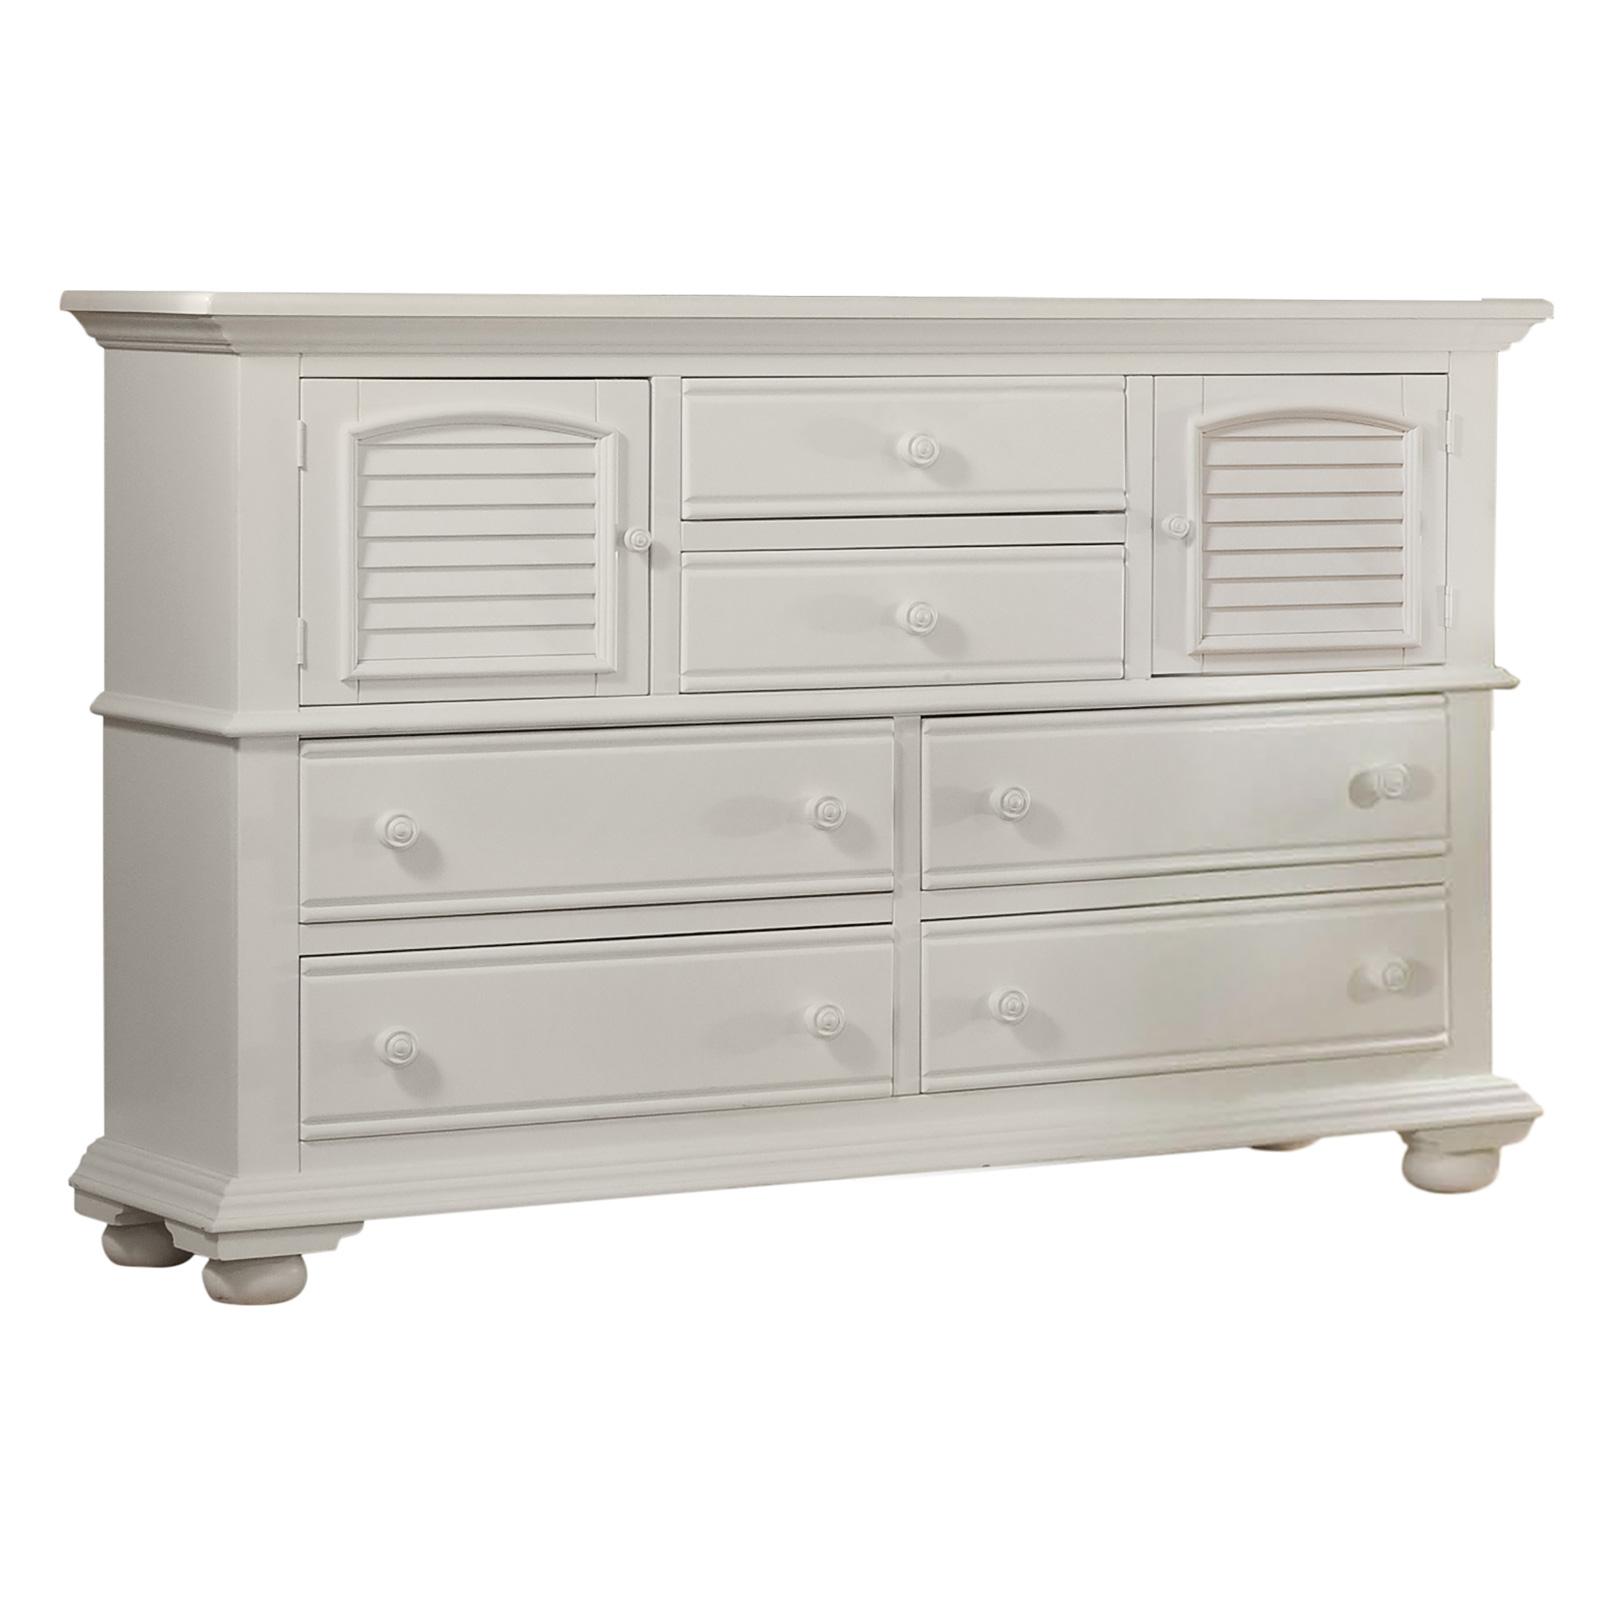 American Woodcrafters COTTAGE 6510-262 Dresser